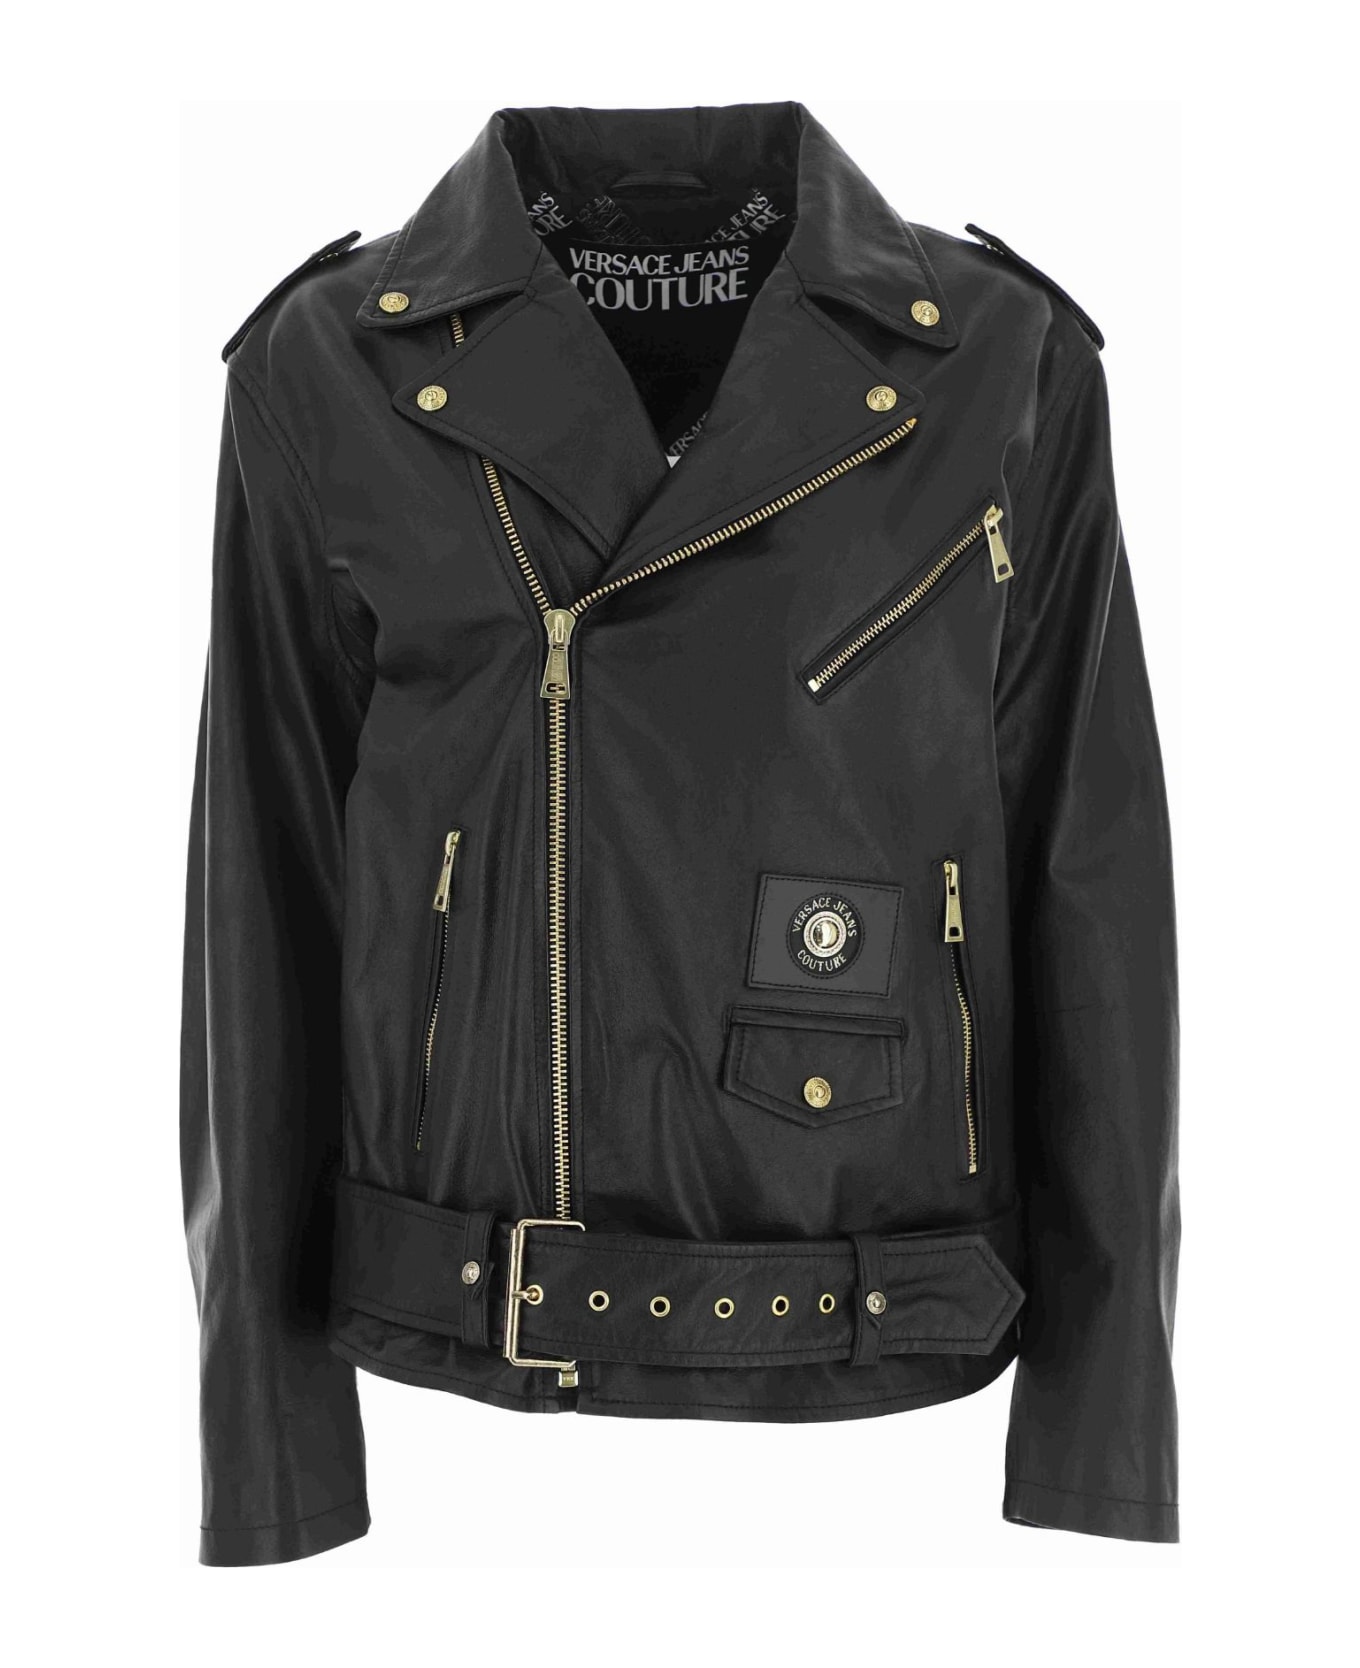 Versace Jeans Couture Leather Jacket - Black レザージャケット